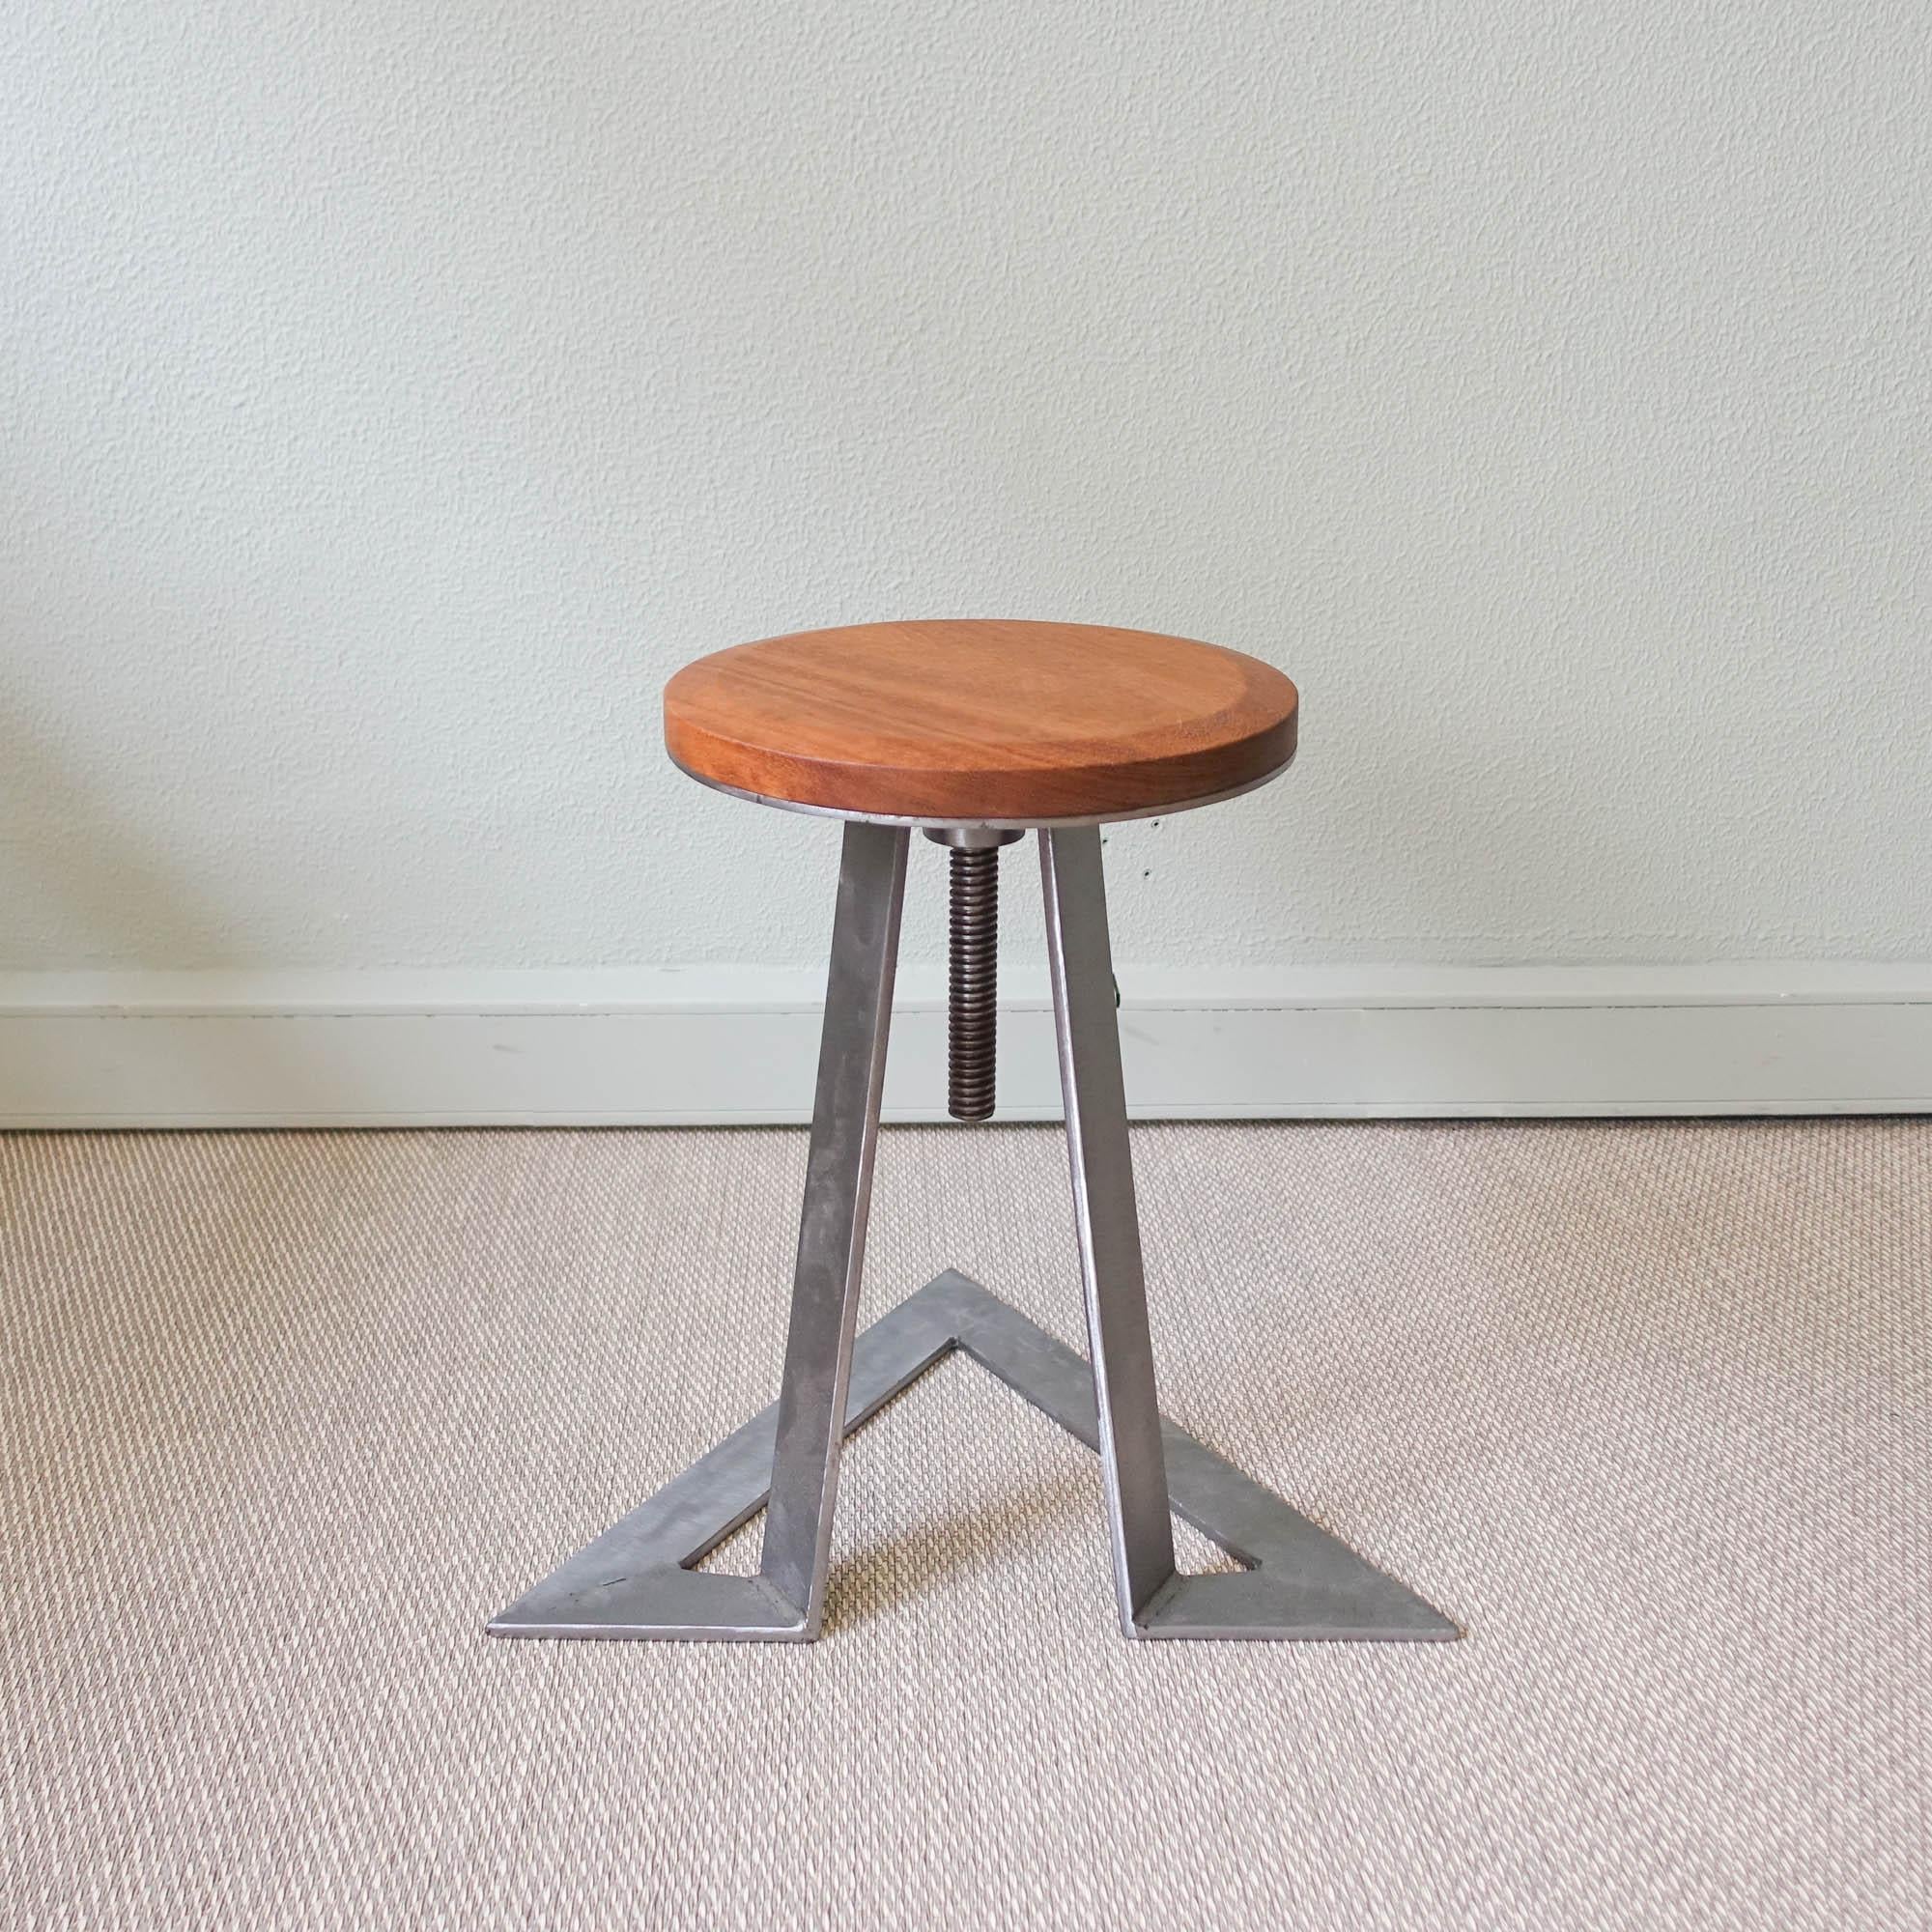 This stool, named 